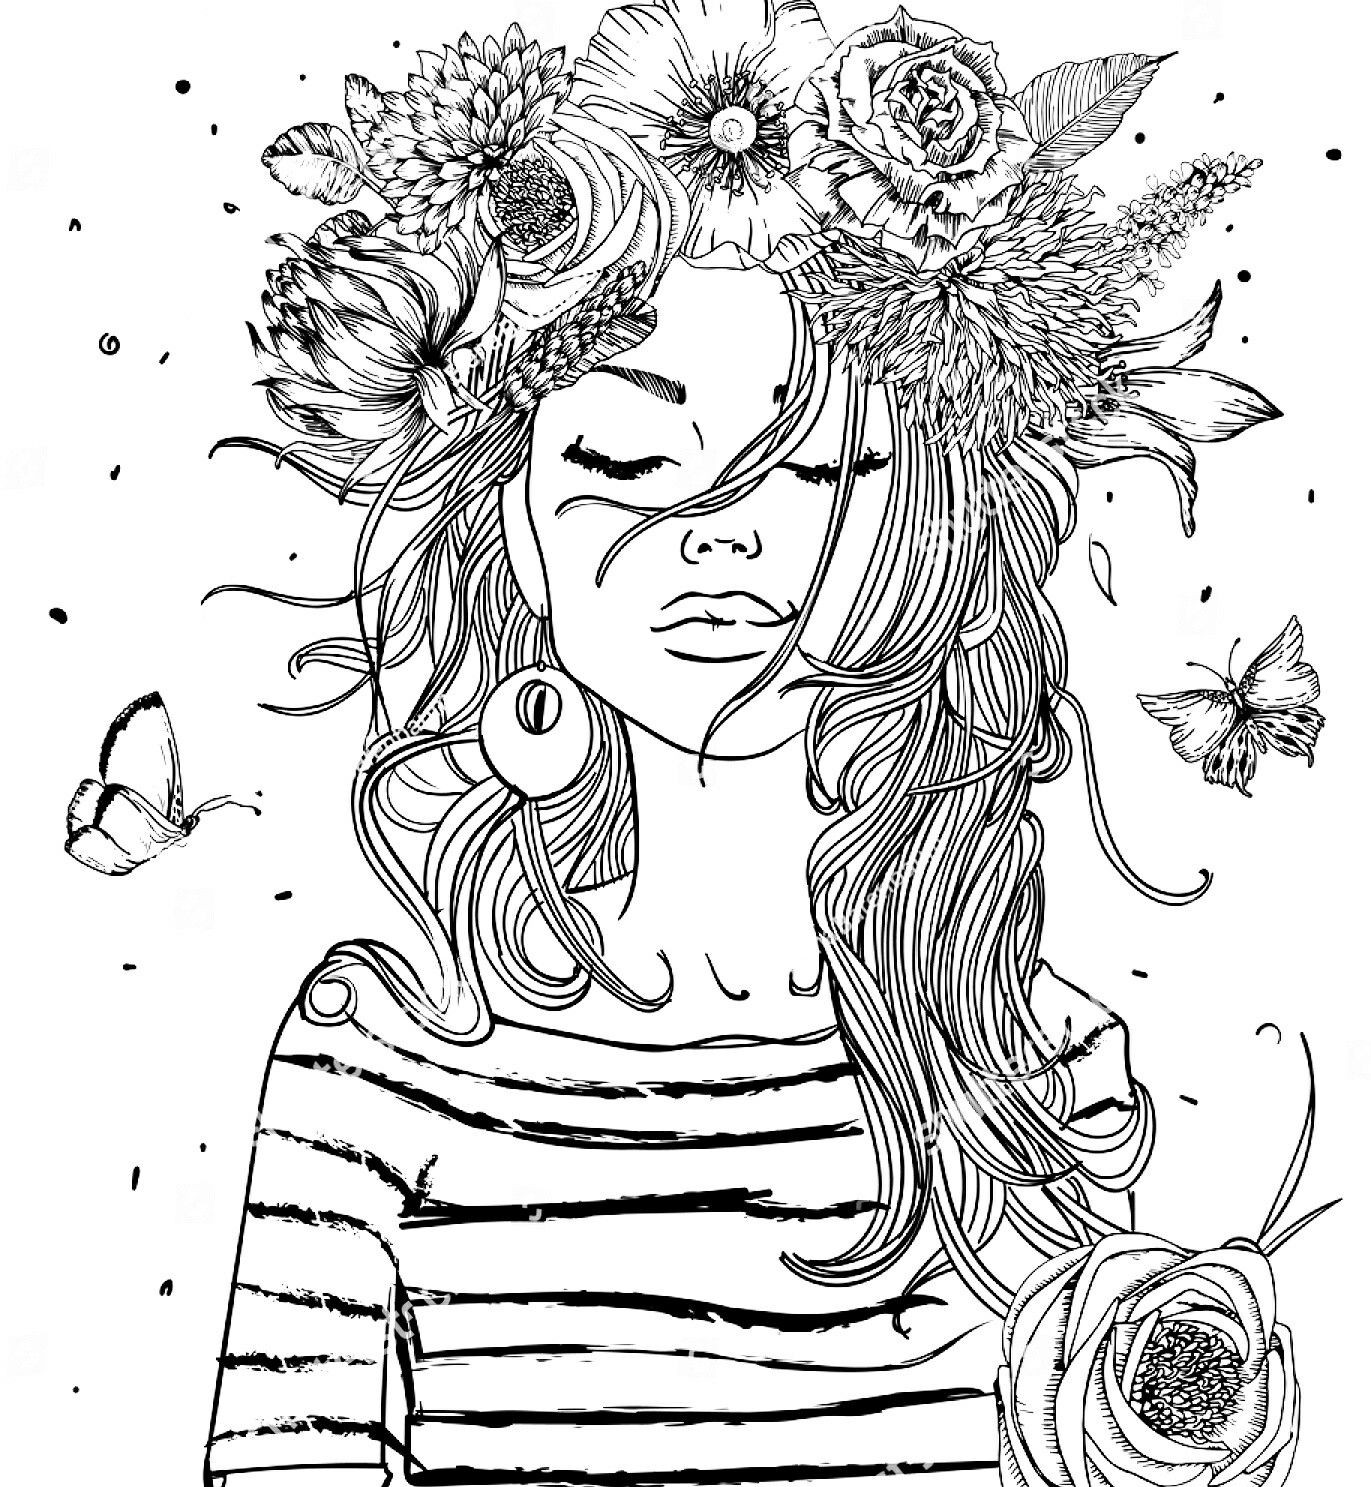 Coloring Pages Of Girls For Adults
 Pin de monica markin en coloring pages